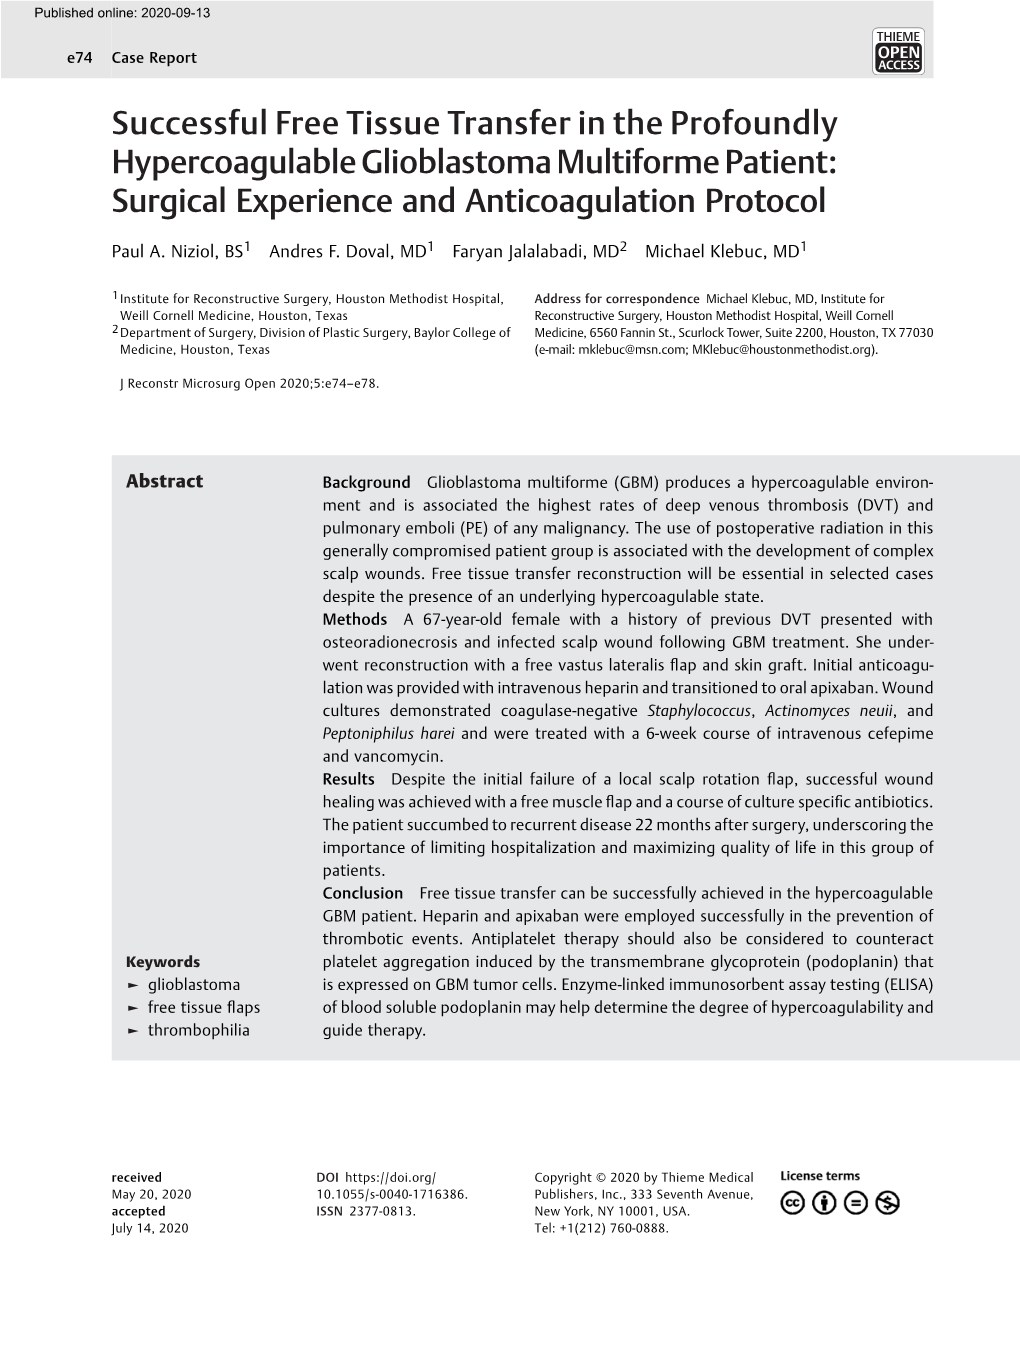 Successful Free Tissue Transfer in the Profoundly Hypercoagulable Glioblastoma Multiforme Patient: Surgical Experience and Anticoagulation Protocol